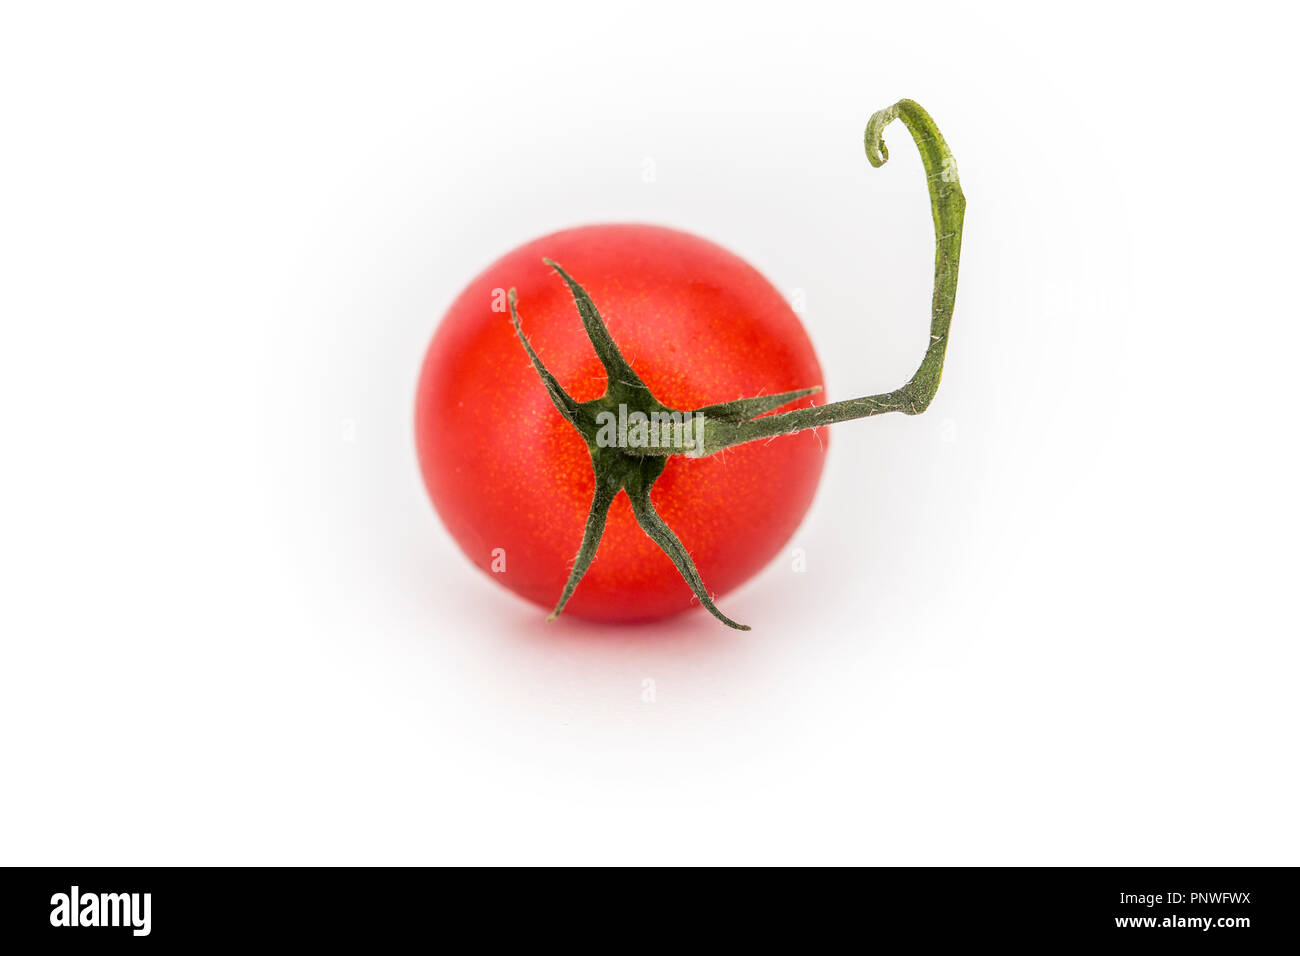 Single tomato on a whilte background with stalk and leaves Stock Photo